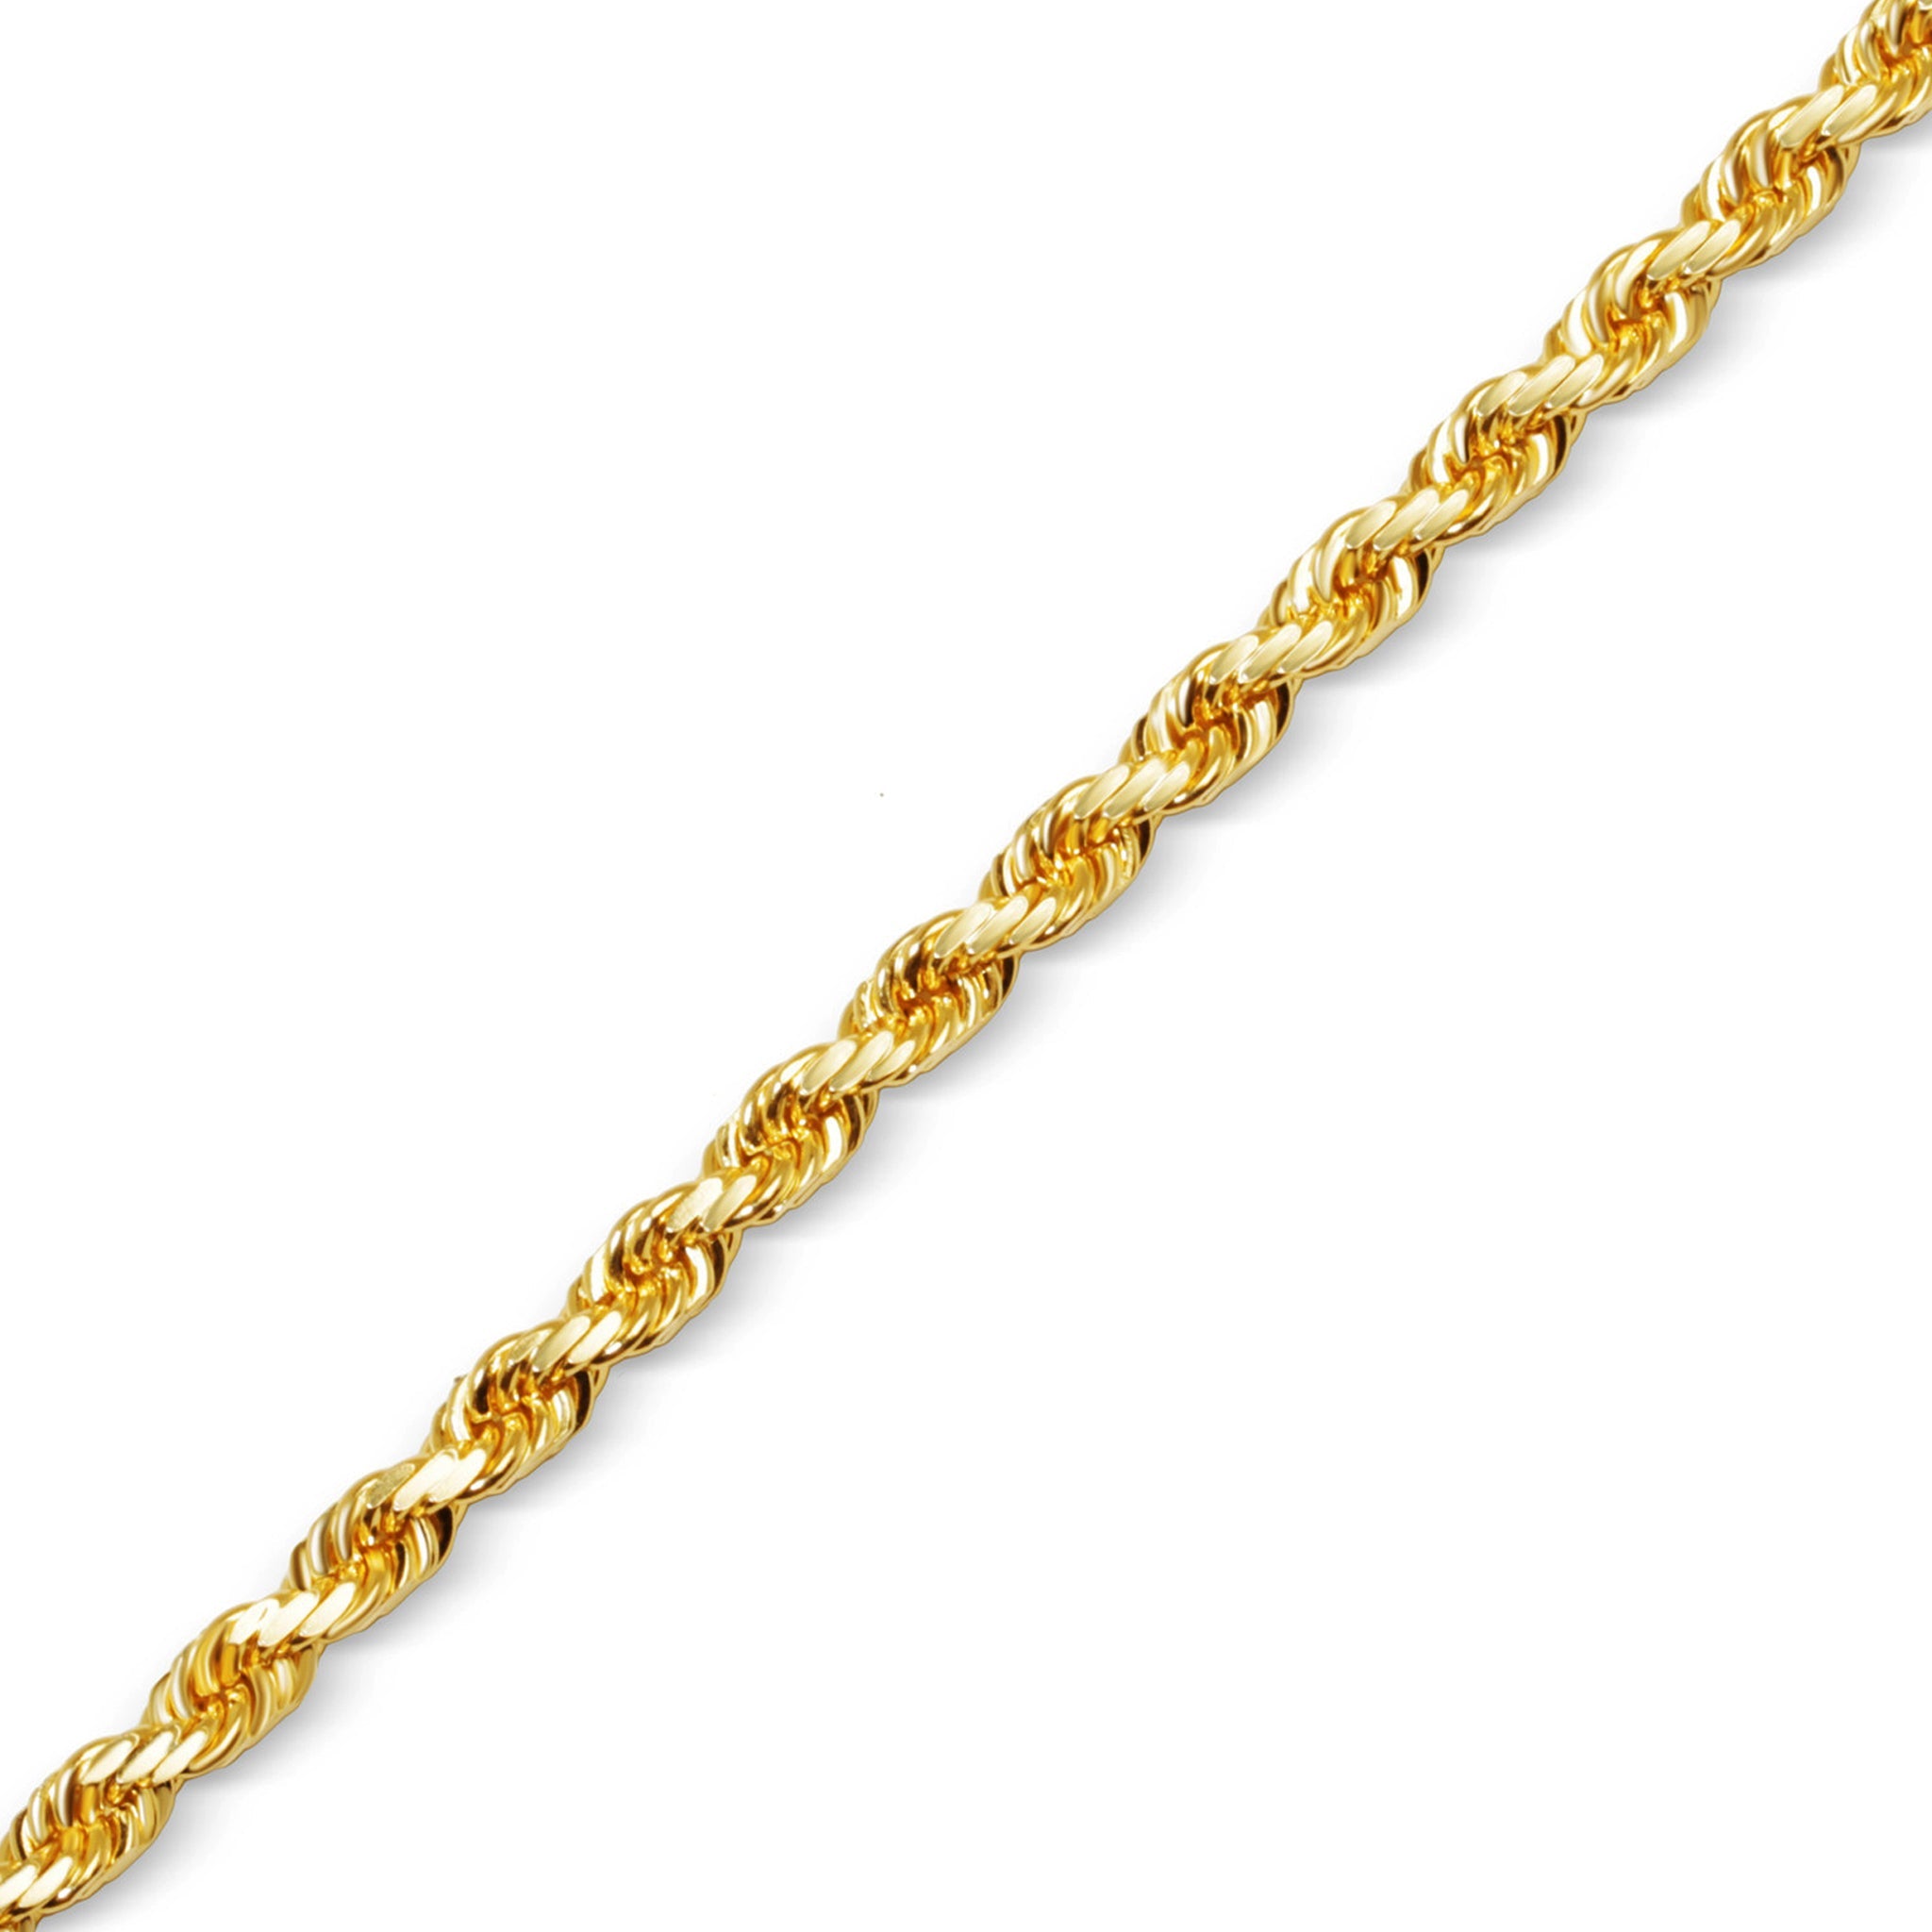 Gold Rope Chain (10mm) (14K YELLOW GOLD) - IF & Co. Custom Jewelers